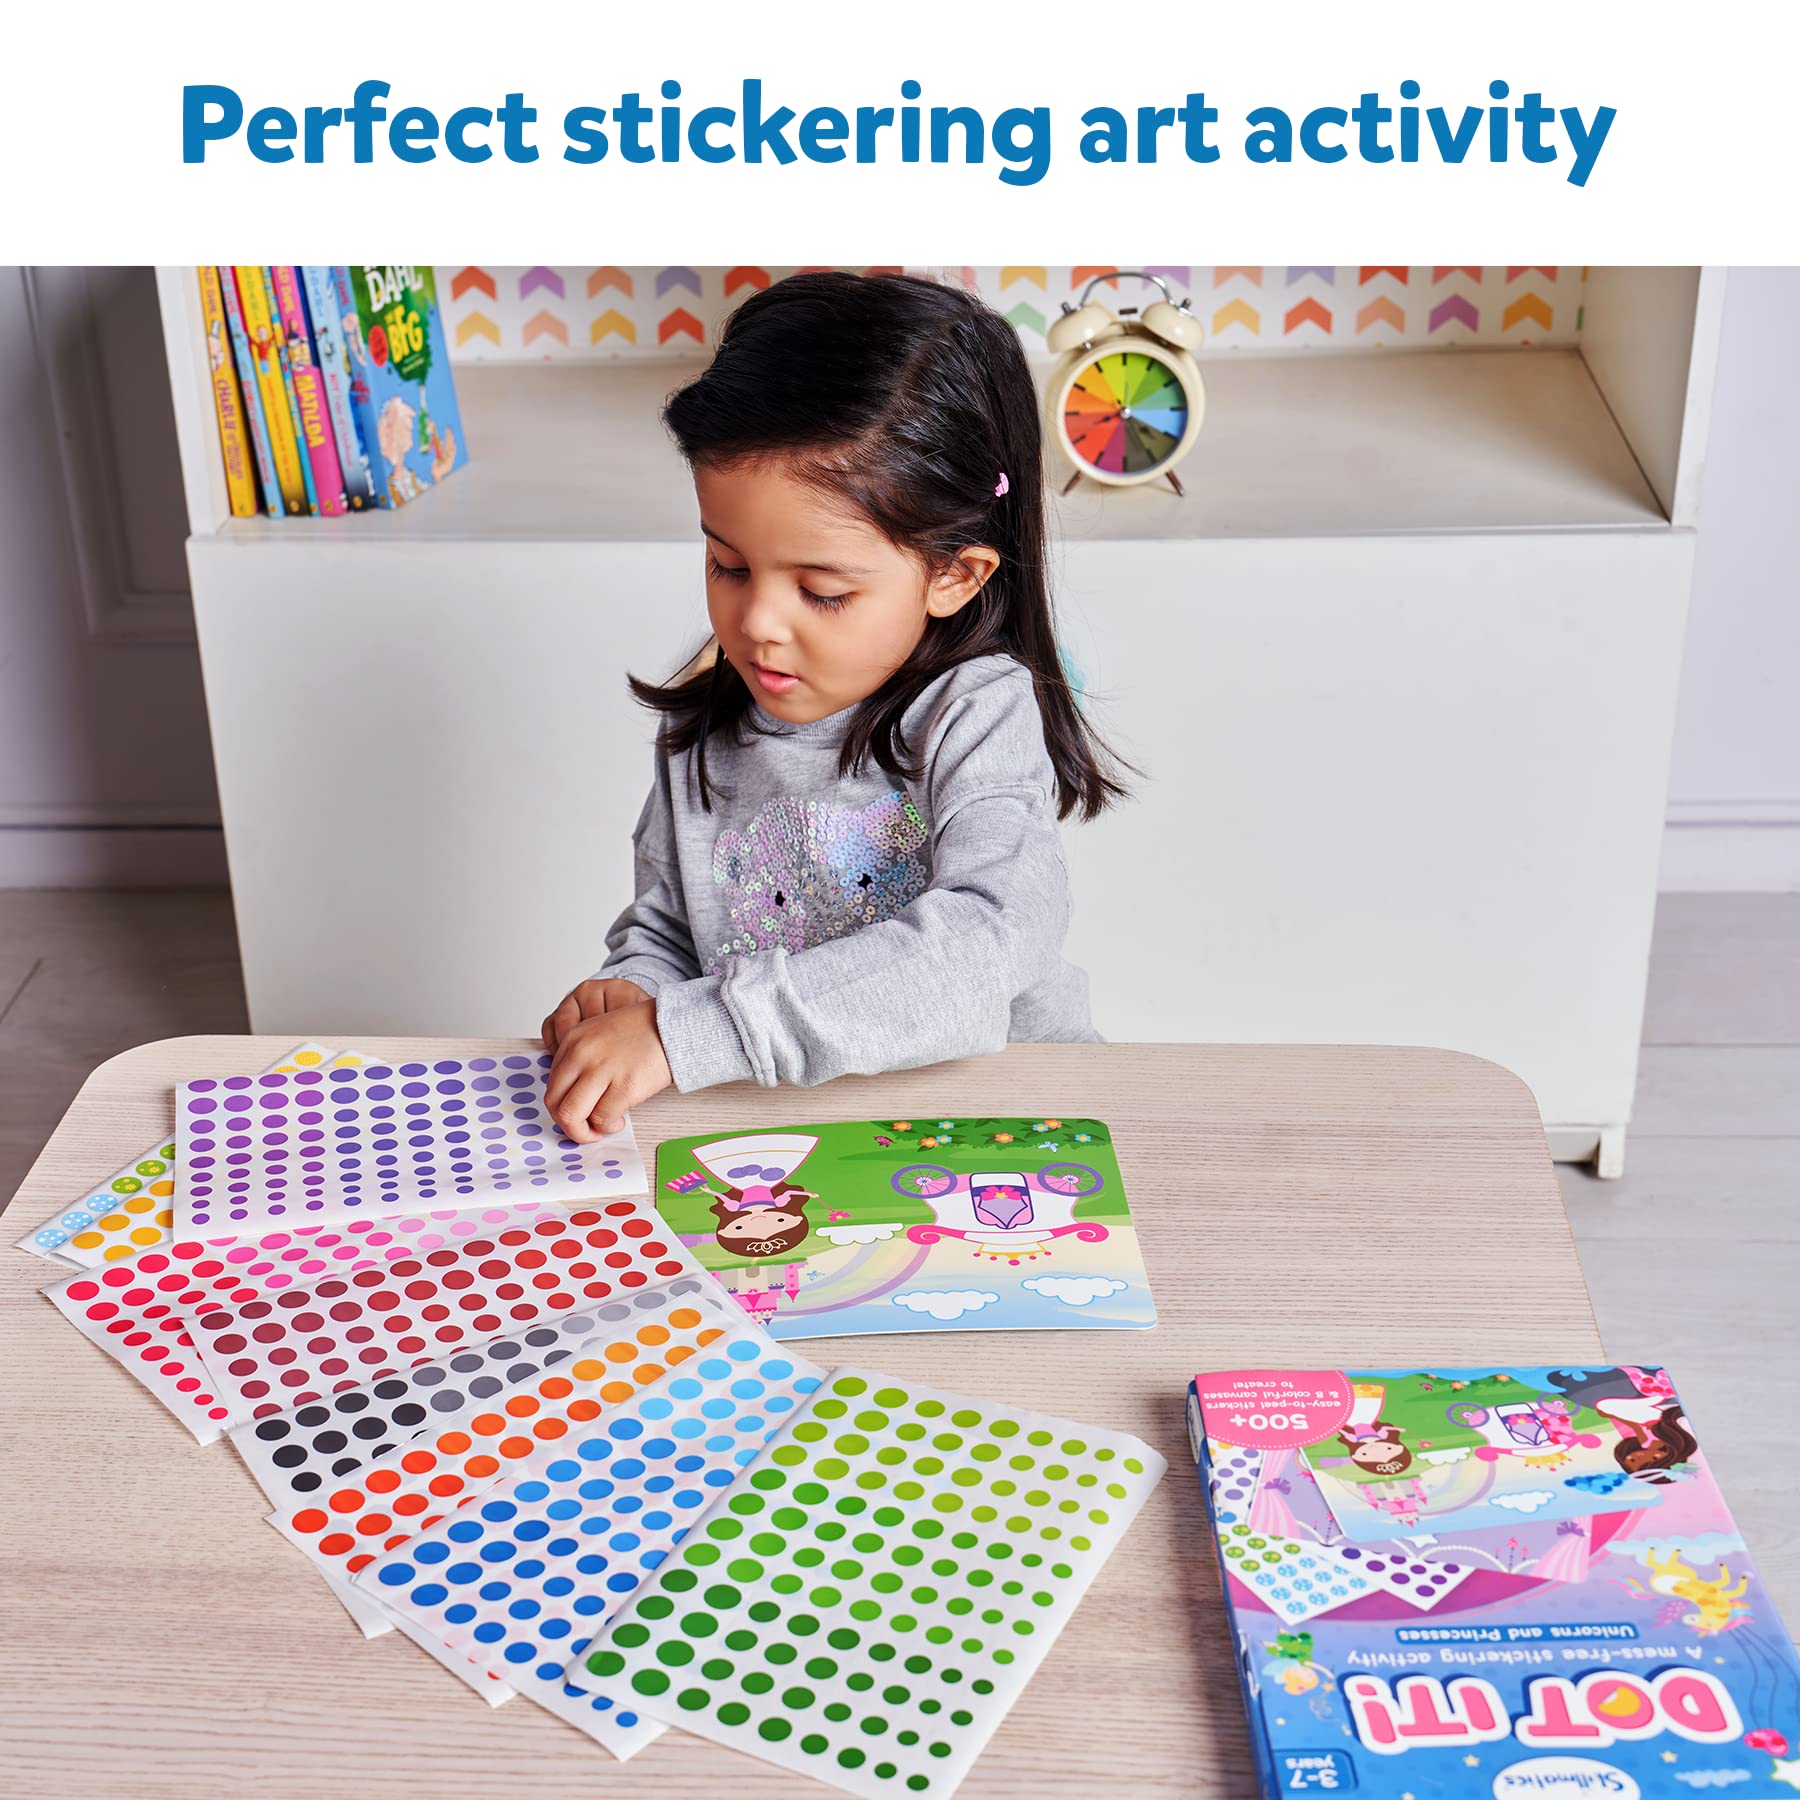 Skillmatics Art Activity Dot It - Unicorns & Princesses, No Mess Sticker Art for Kids, Craft Kits, DIY Activity, Gifts for Ages 3 to 7